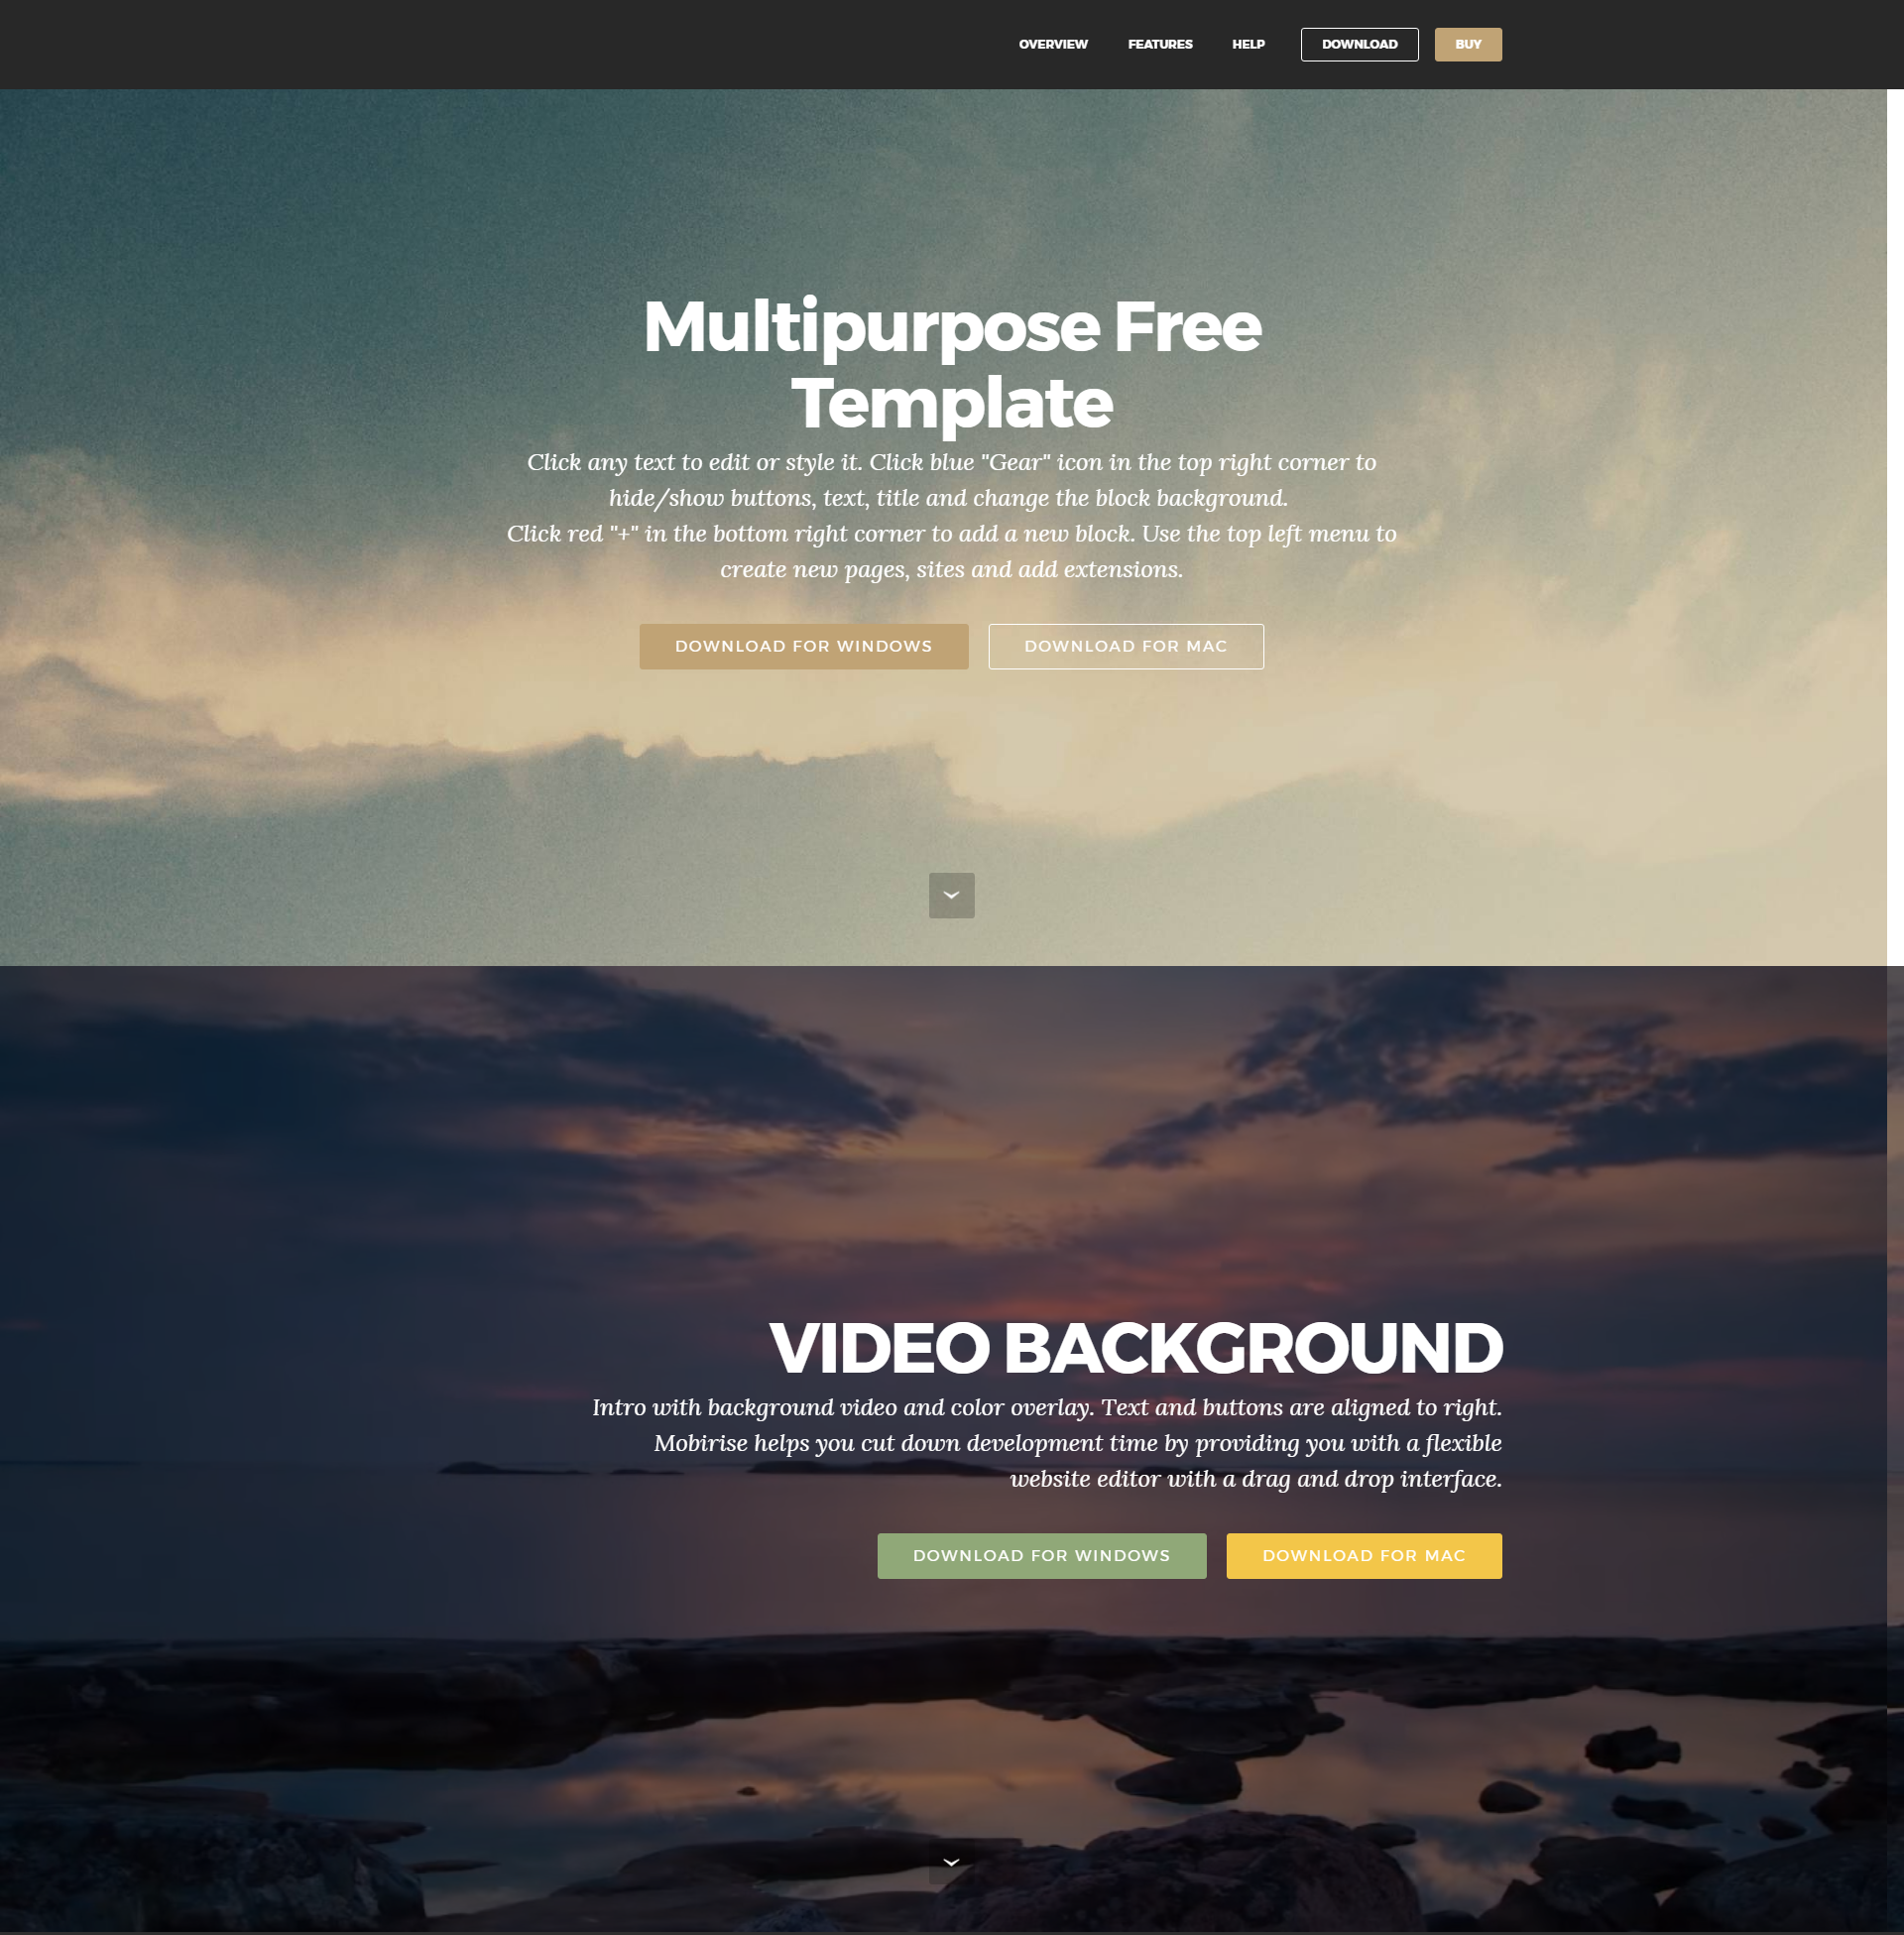 Free Download Bootstrap Templates